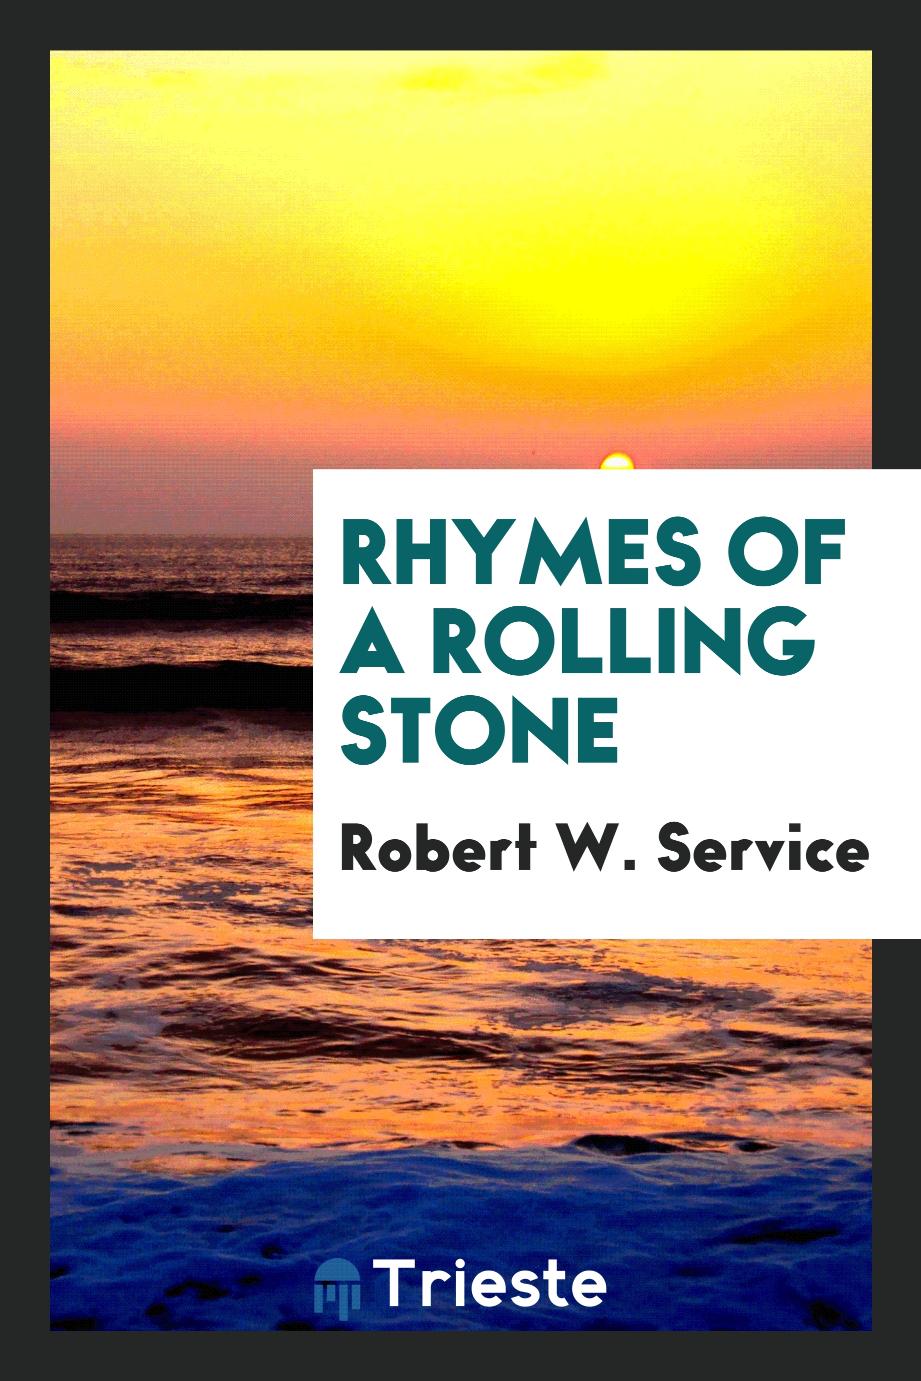 Rhymes of a rolling stone